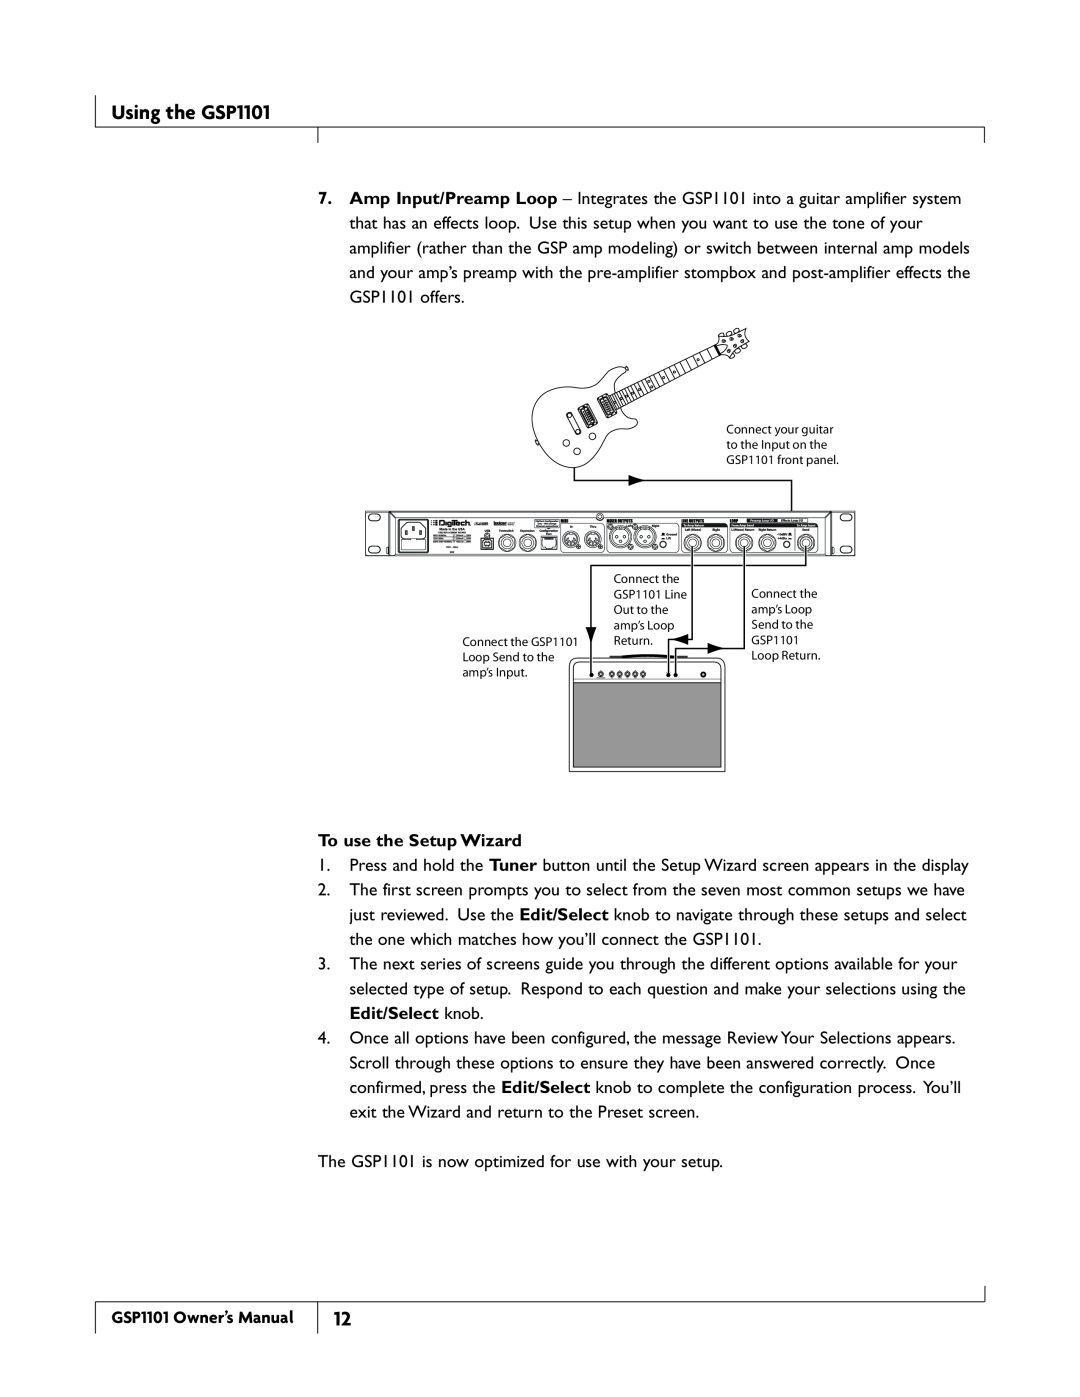 DigiTech owner manual Using the GSP1101, To use the Setup Wizard 